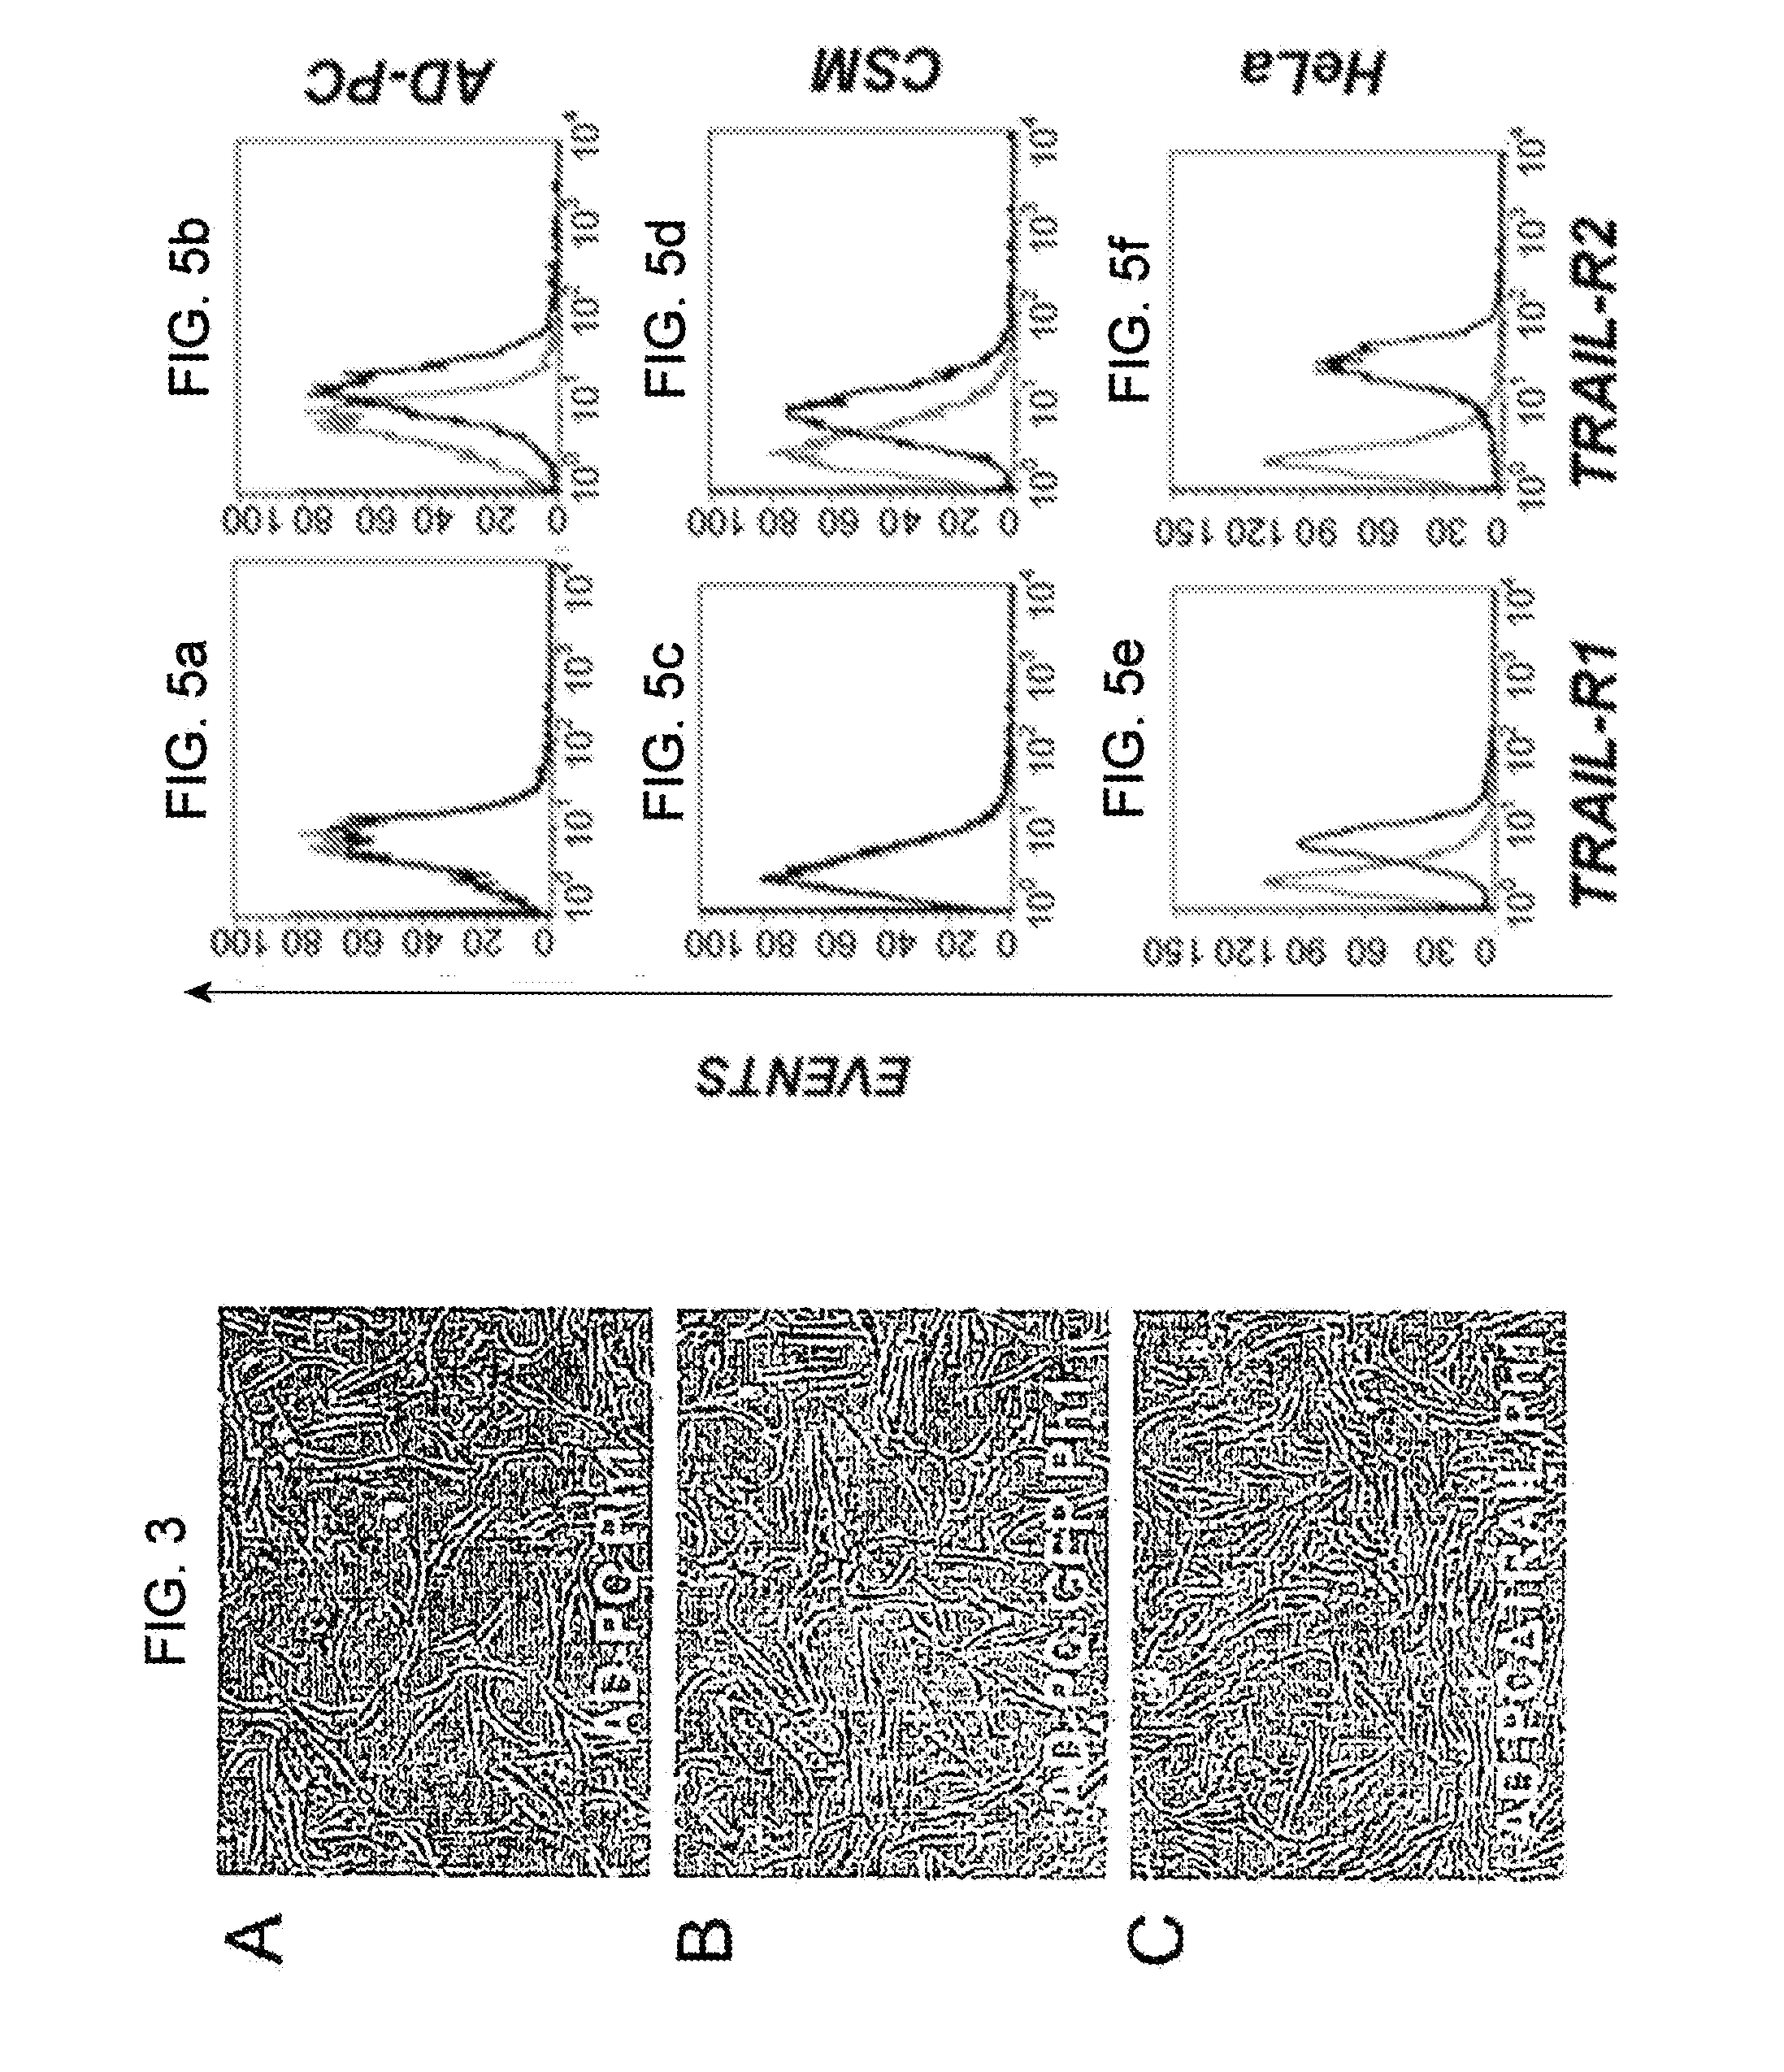 Method for production of anti-tumor TRAIL protein